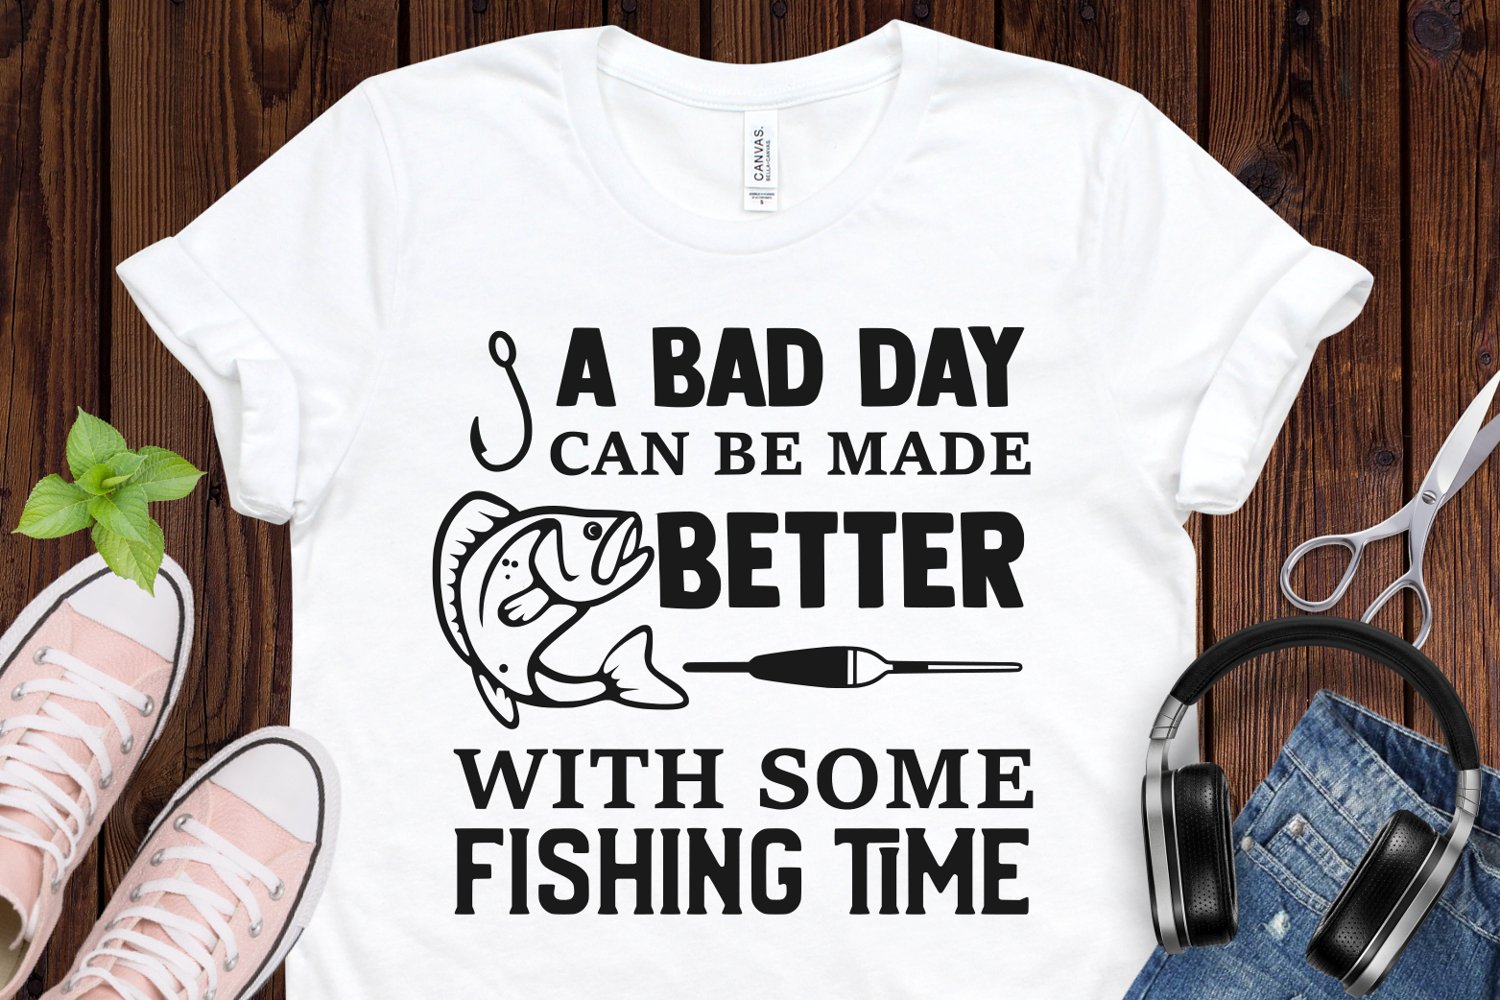 Make your day much better with some fishing time.